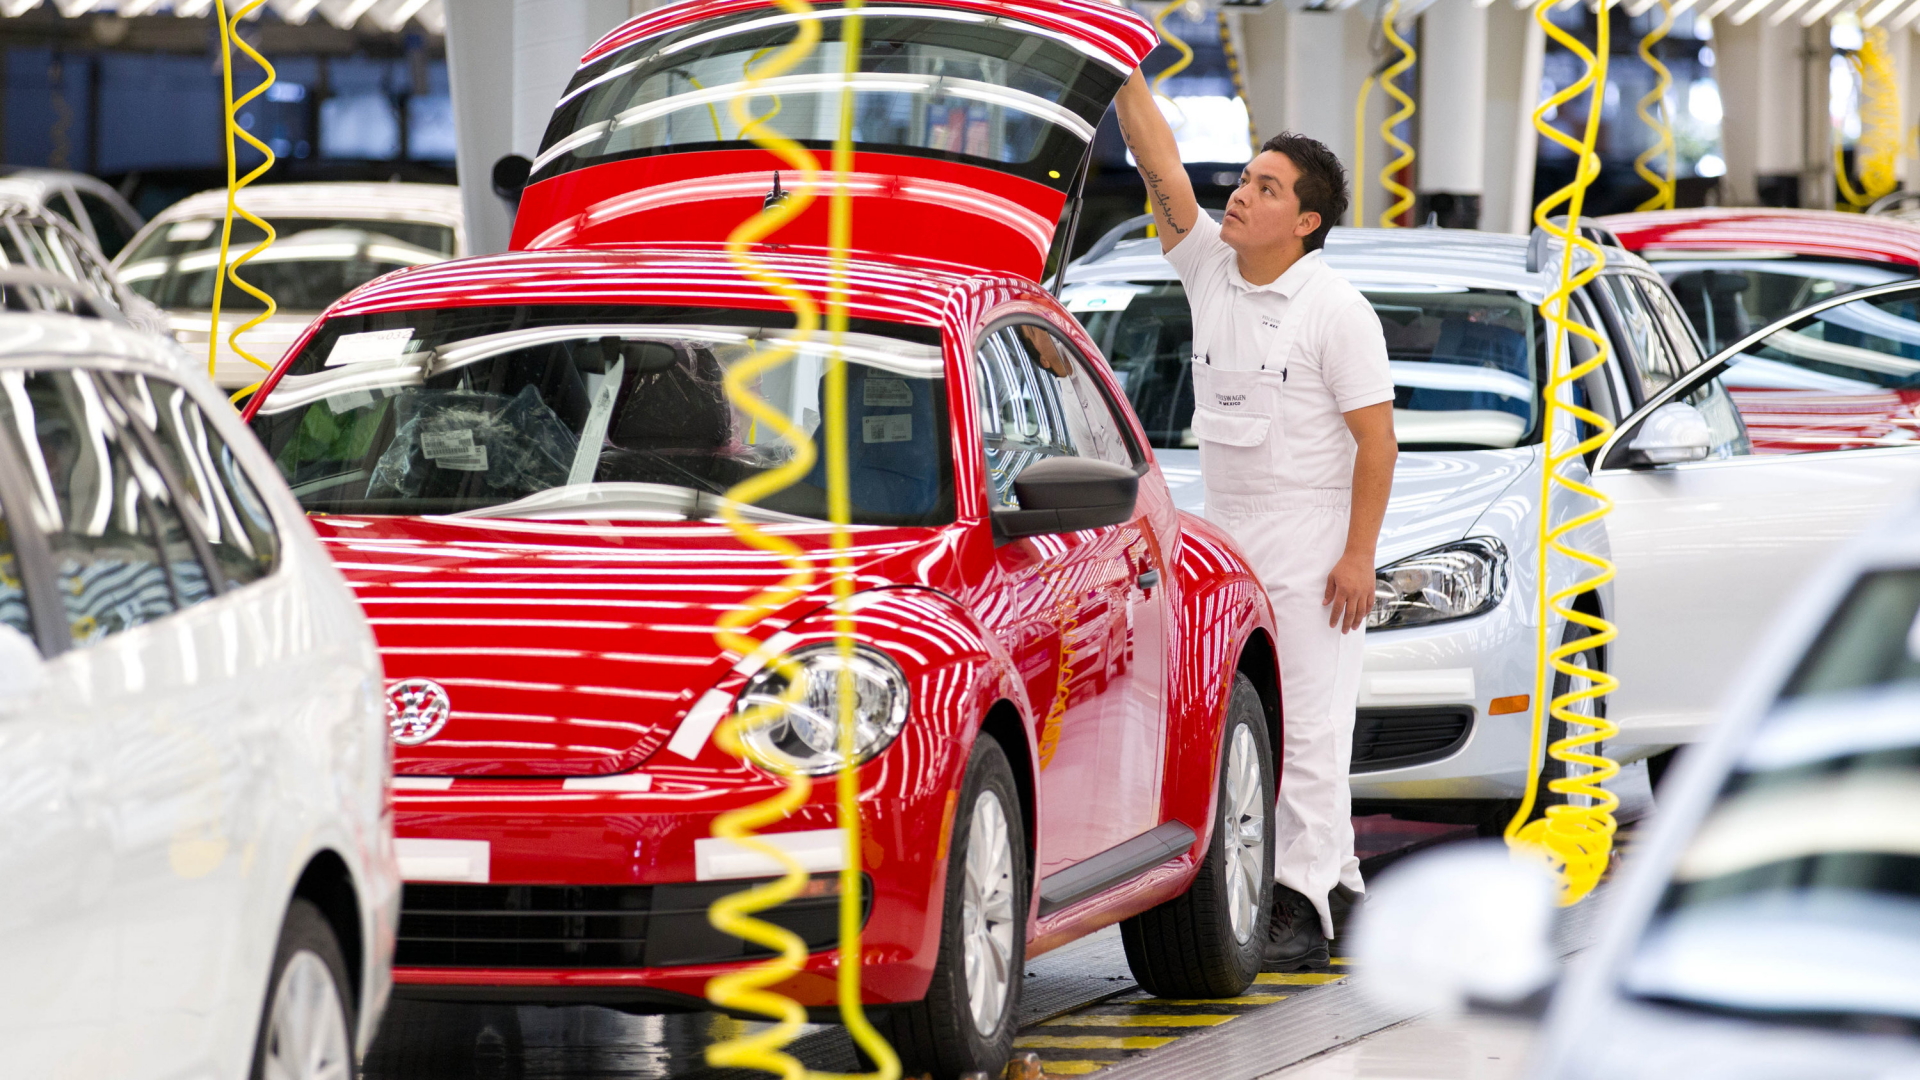 Produktion des VW Beetle in Mexiko | dpa